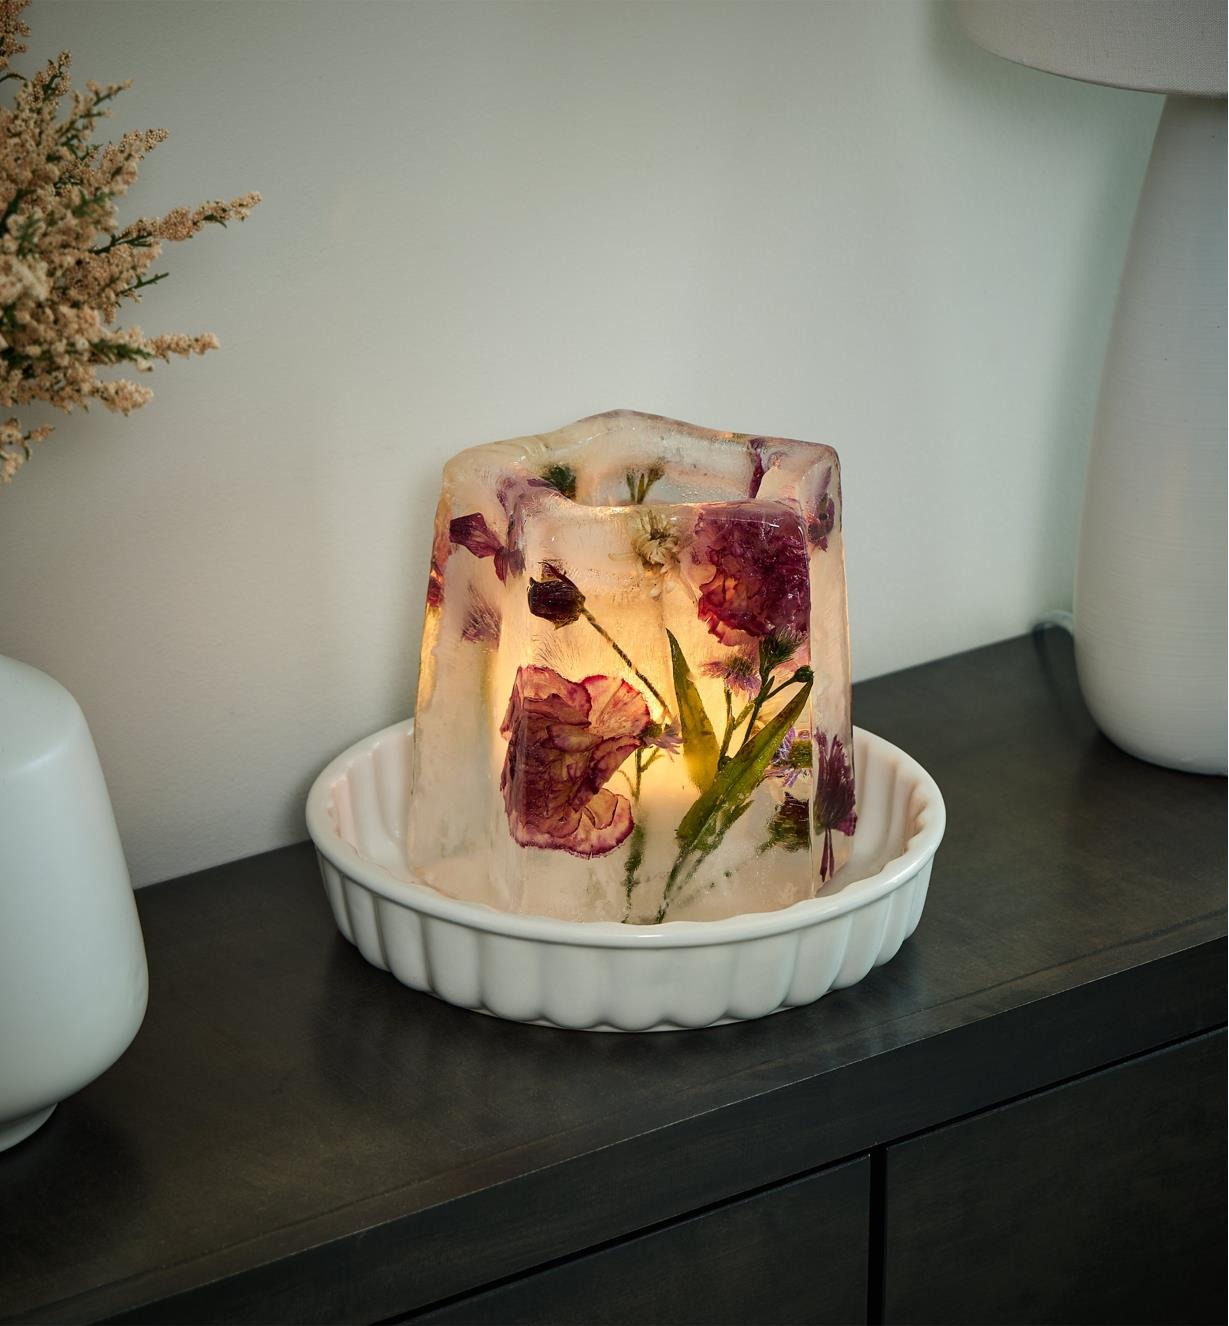 Ice lantern with flowers and greenery frozen inside